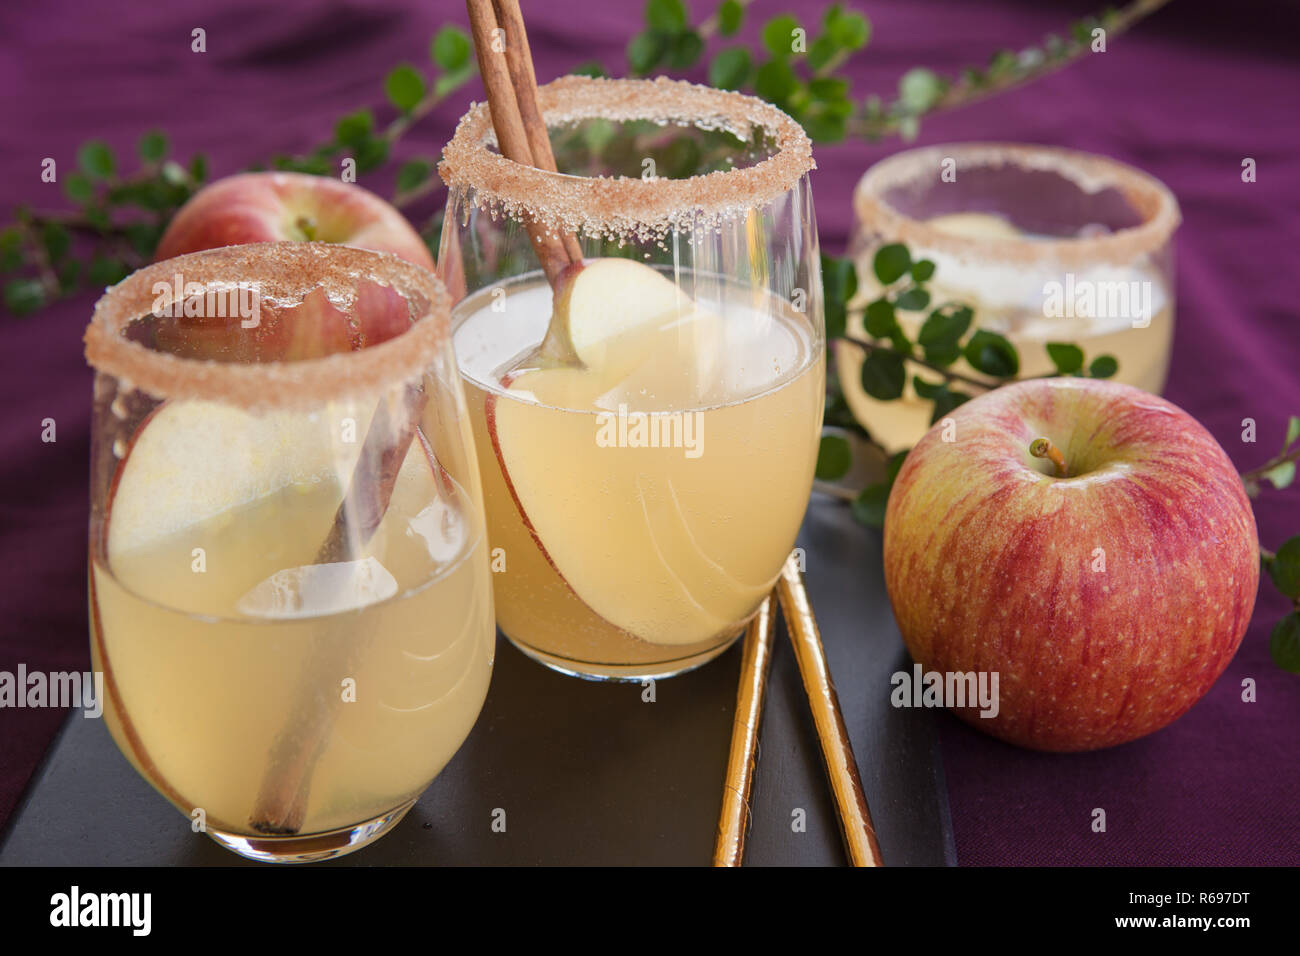 Fruity Drink With Apple And Cinnamon Stock Photo